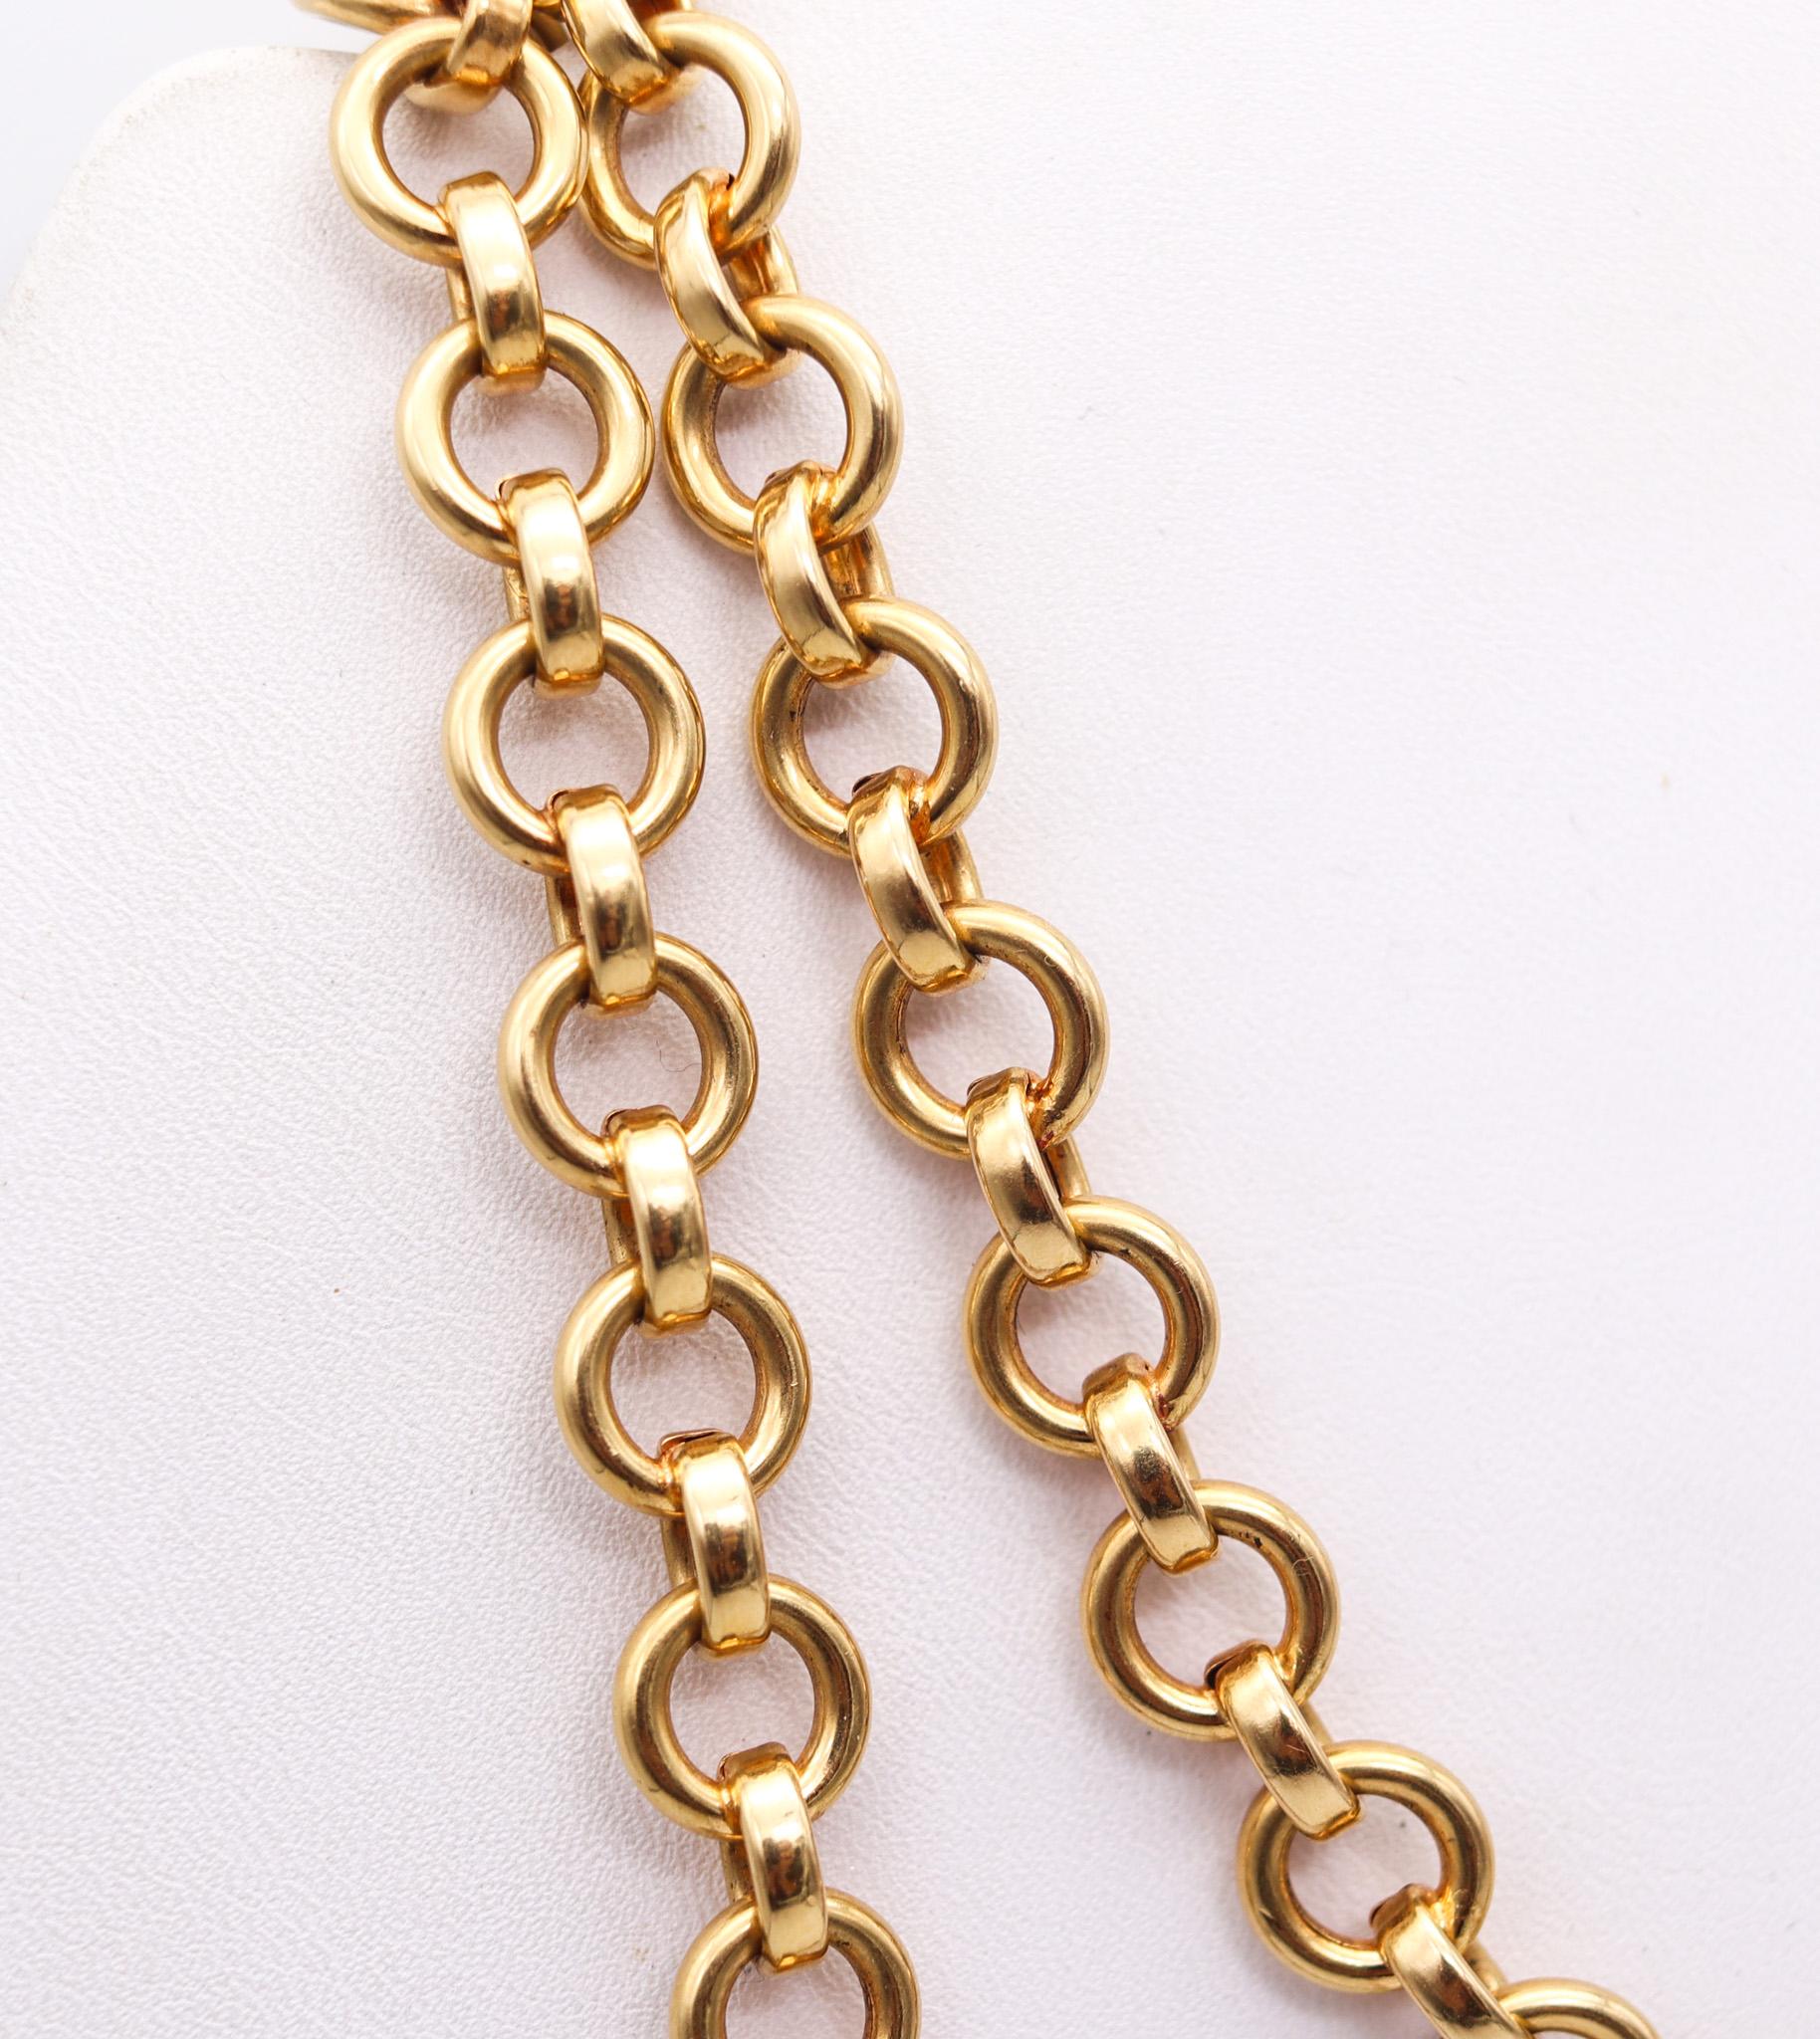 Bruno Dal Lago 1970 Vicenza Modernist Links Chain In Polished 18Kt Yellow Gold In Excellent Condition For Sale In Miami, FL